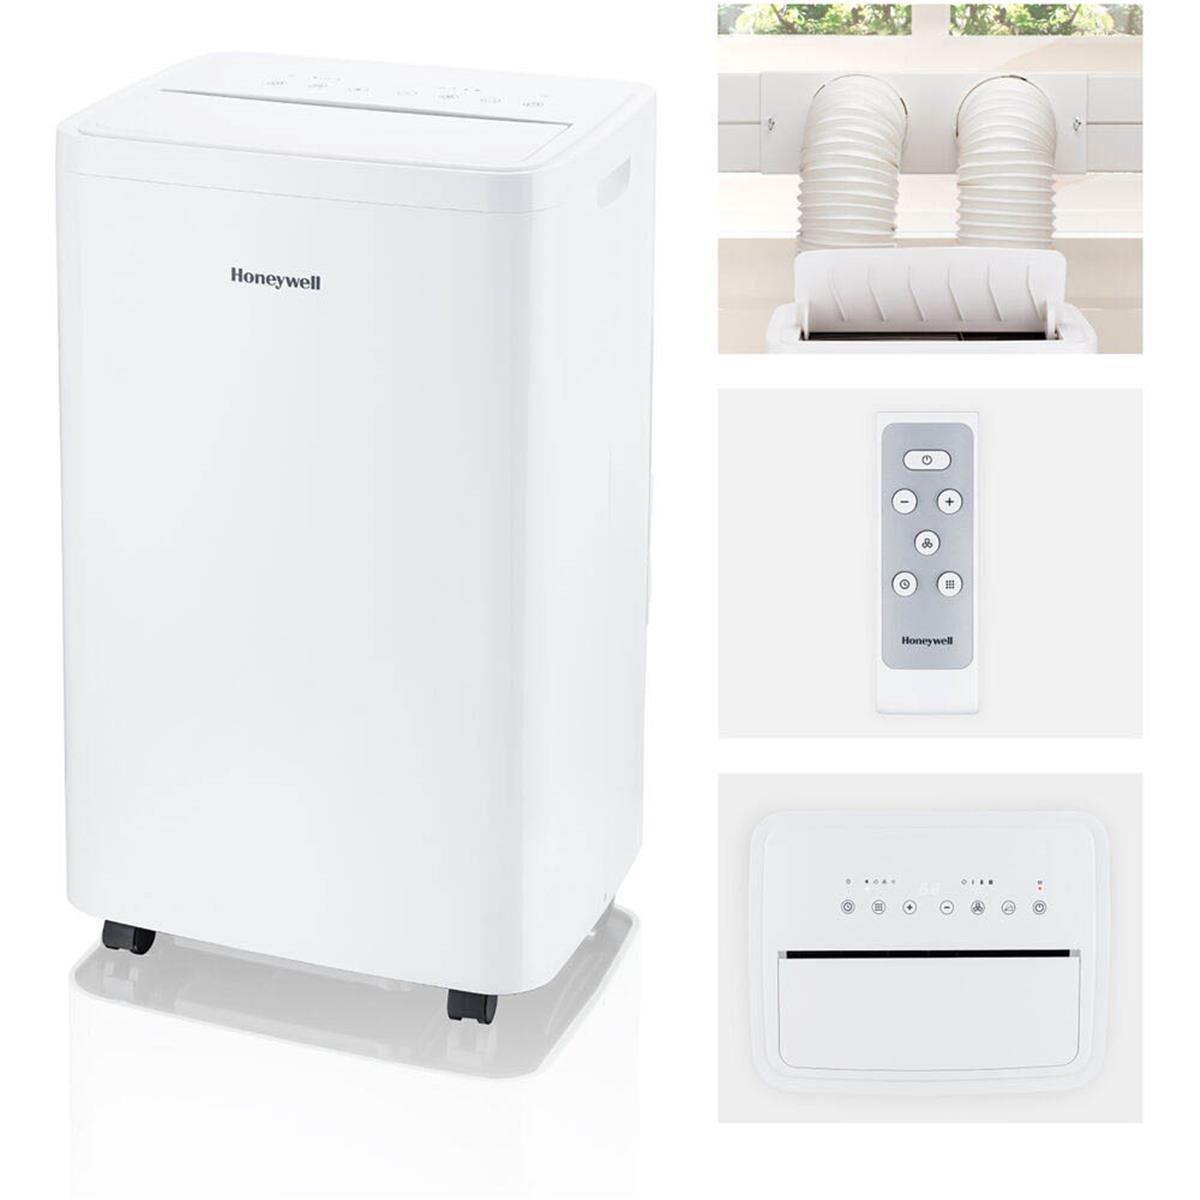 Picture of Honeywell HW4CEDAWW0 14500 BTU Dual Hose Portable Air Conditioner with Dehumidifier